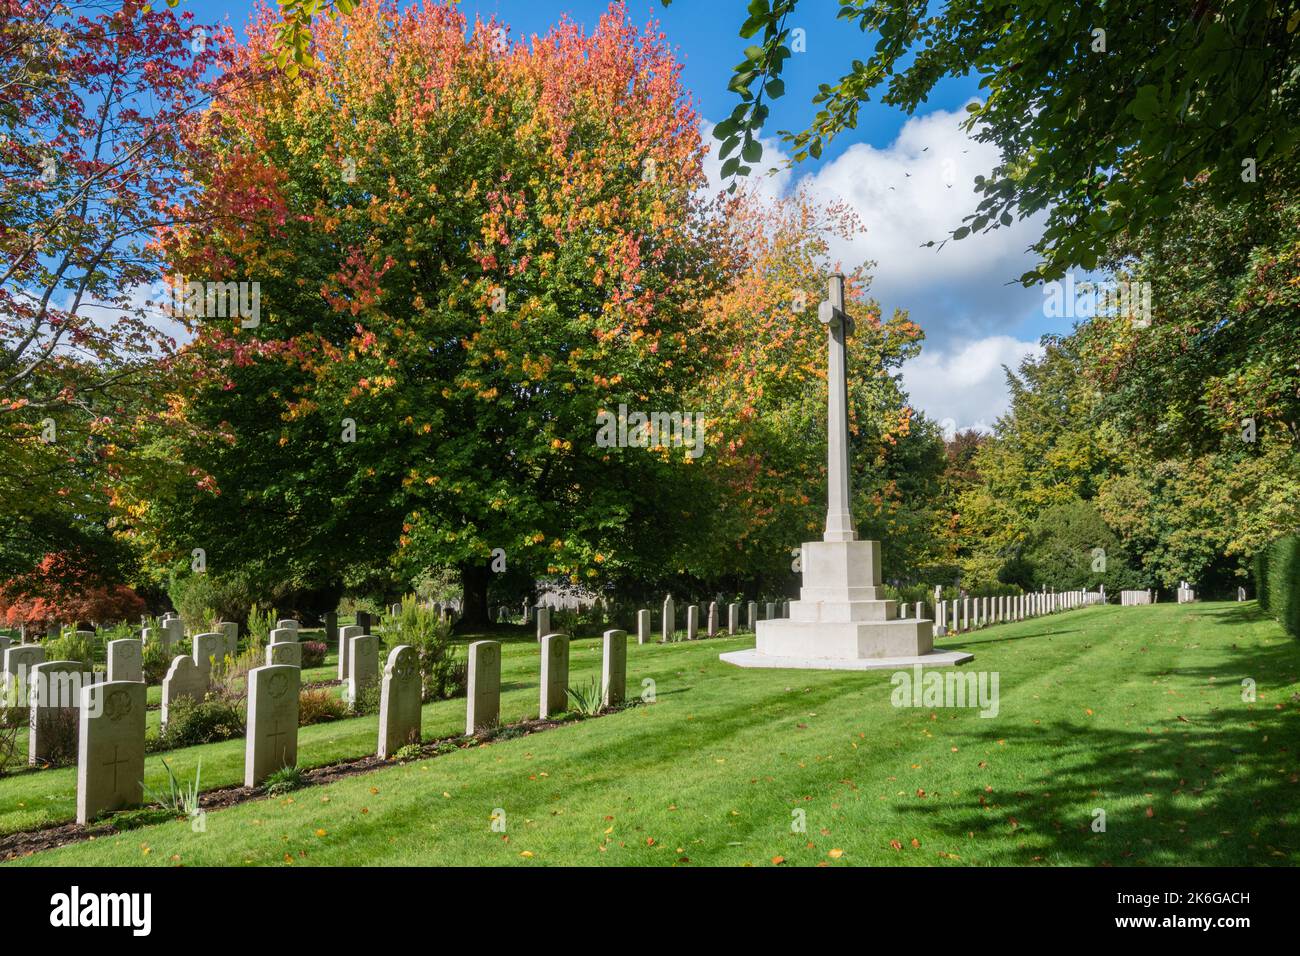 Memorial cross and graves of Canadian soldiers from the first world war in the churchyard of St Mary's Church in Bramshott, Hampshire, England, UK Stock Photo